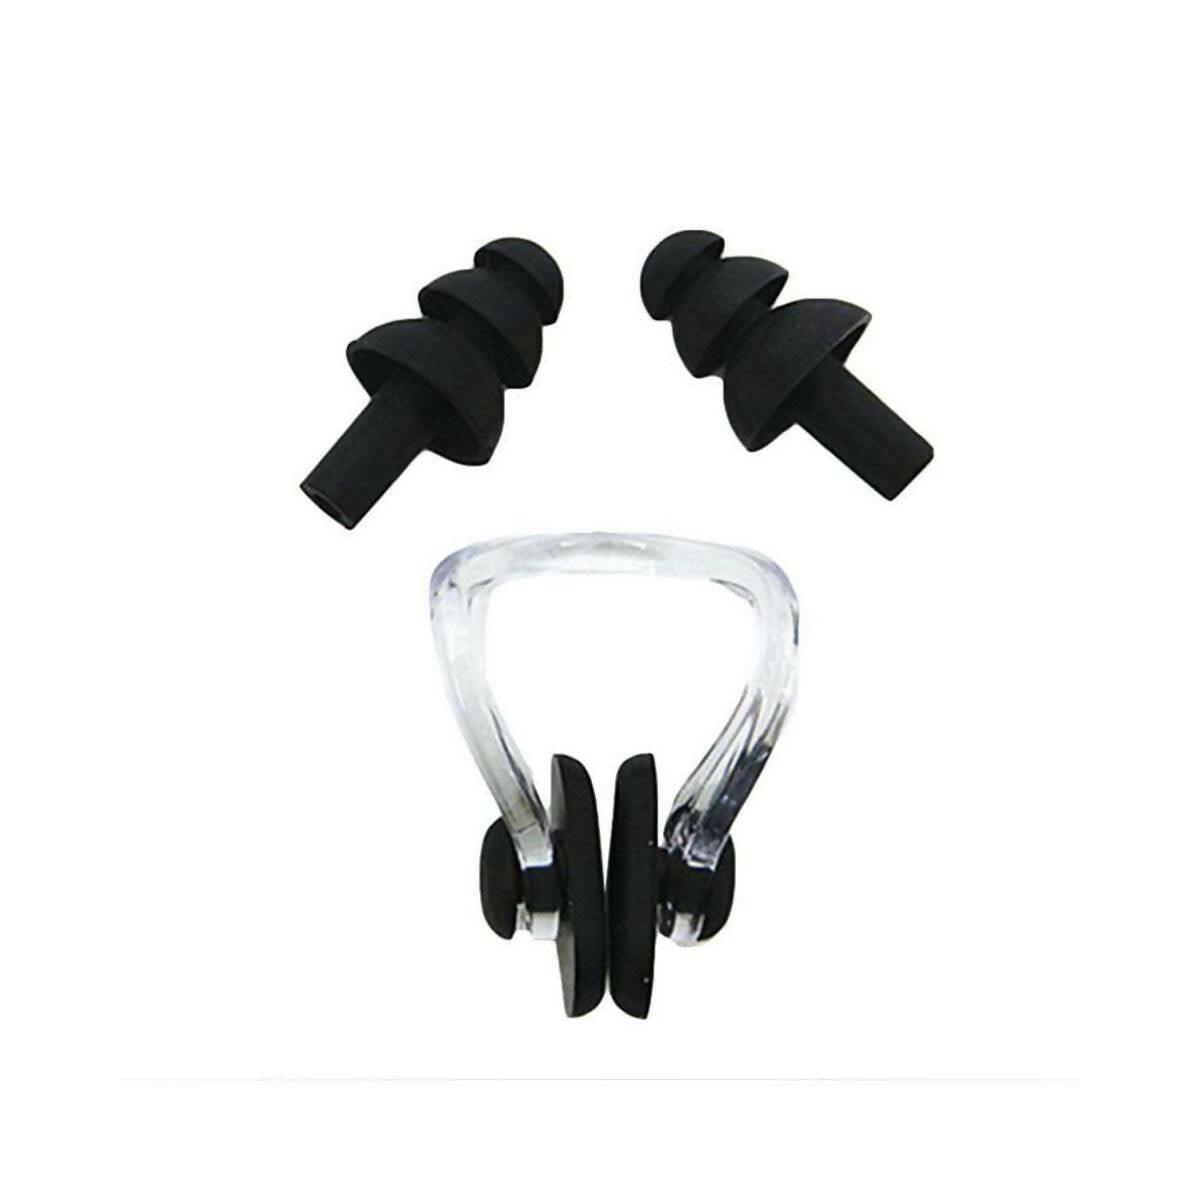 Soft Silicone Swimming Set Waterproof Nose Clip Ear Plug Set with Protective Case - Black - ValueBox